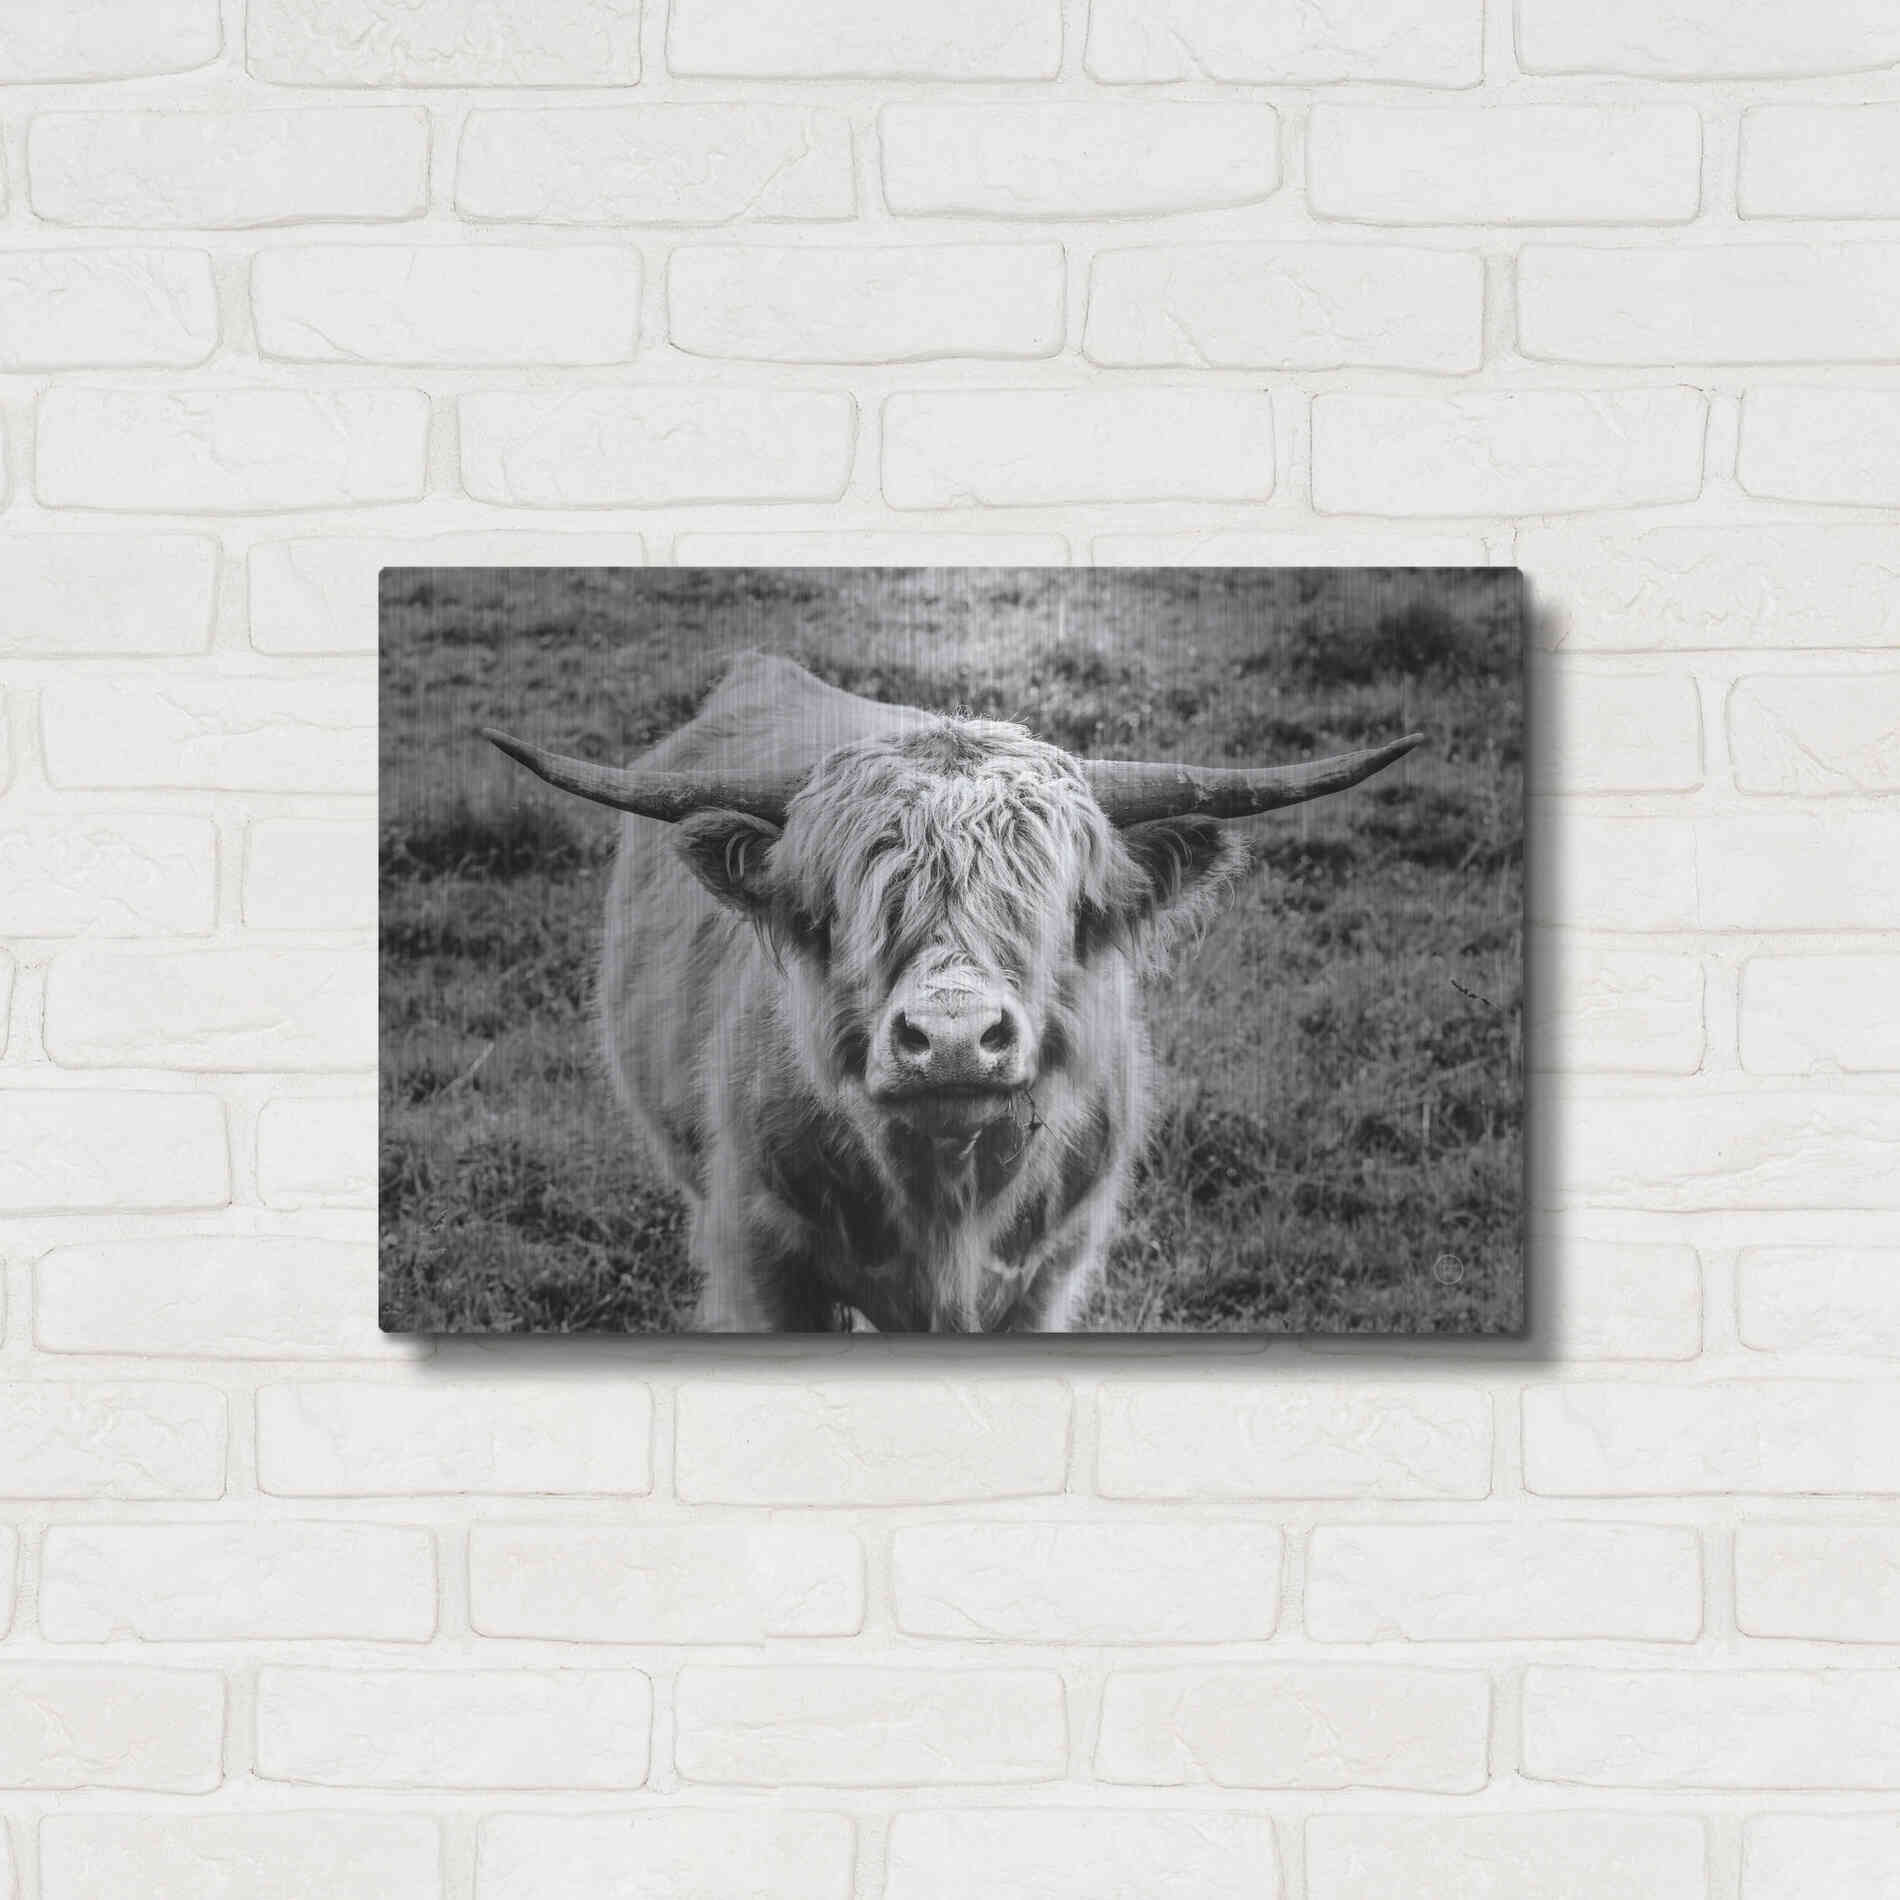 Luxe Metal Art 'Highland Cow Staring Contest' by Nathan Larson, Metal Wall Art,24x16